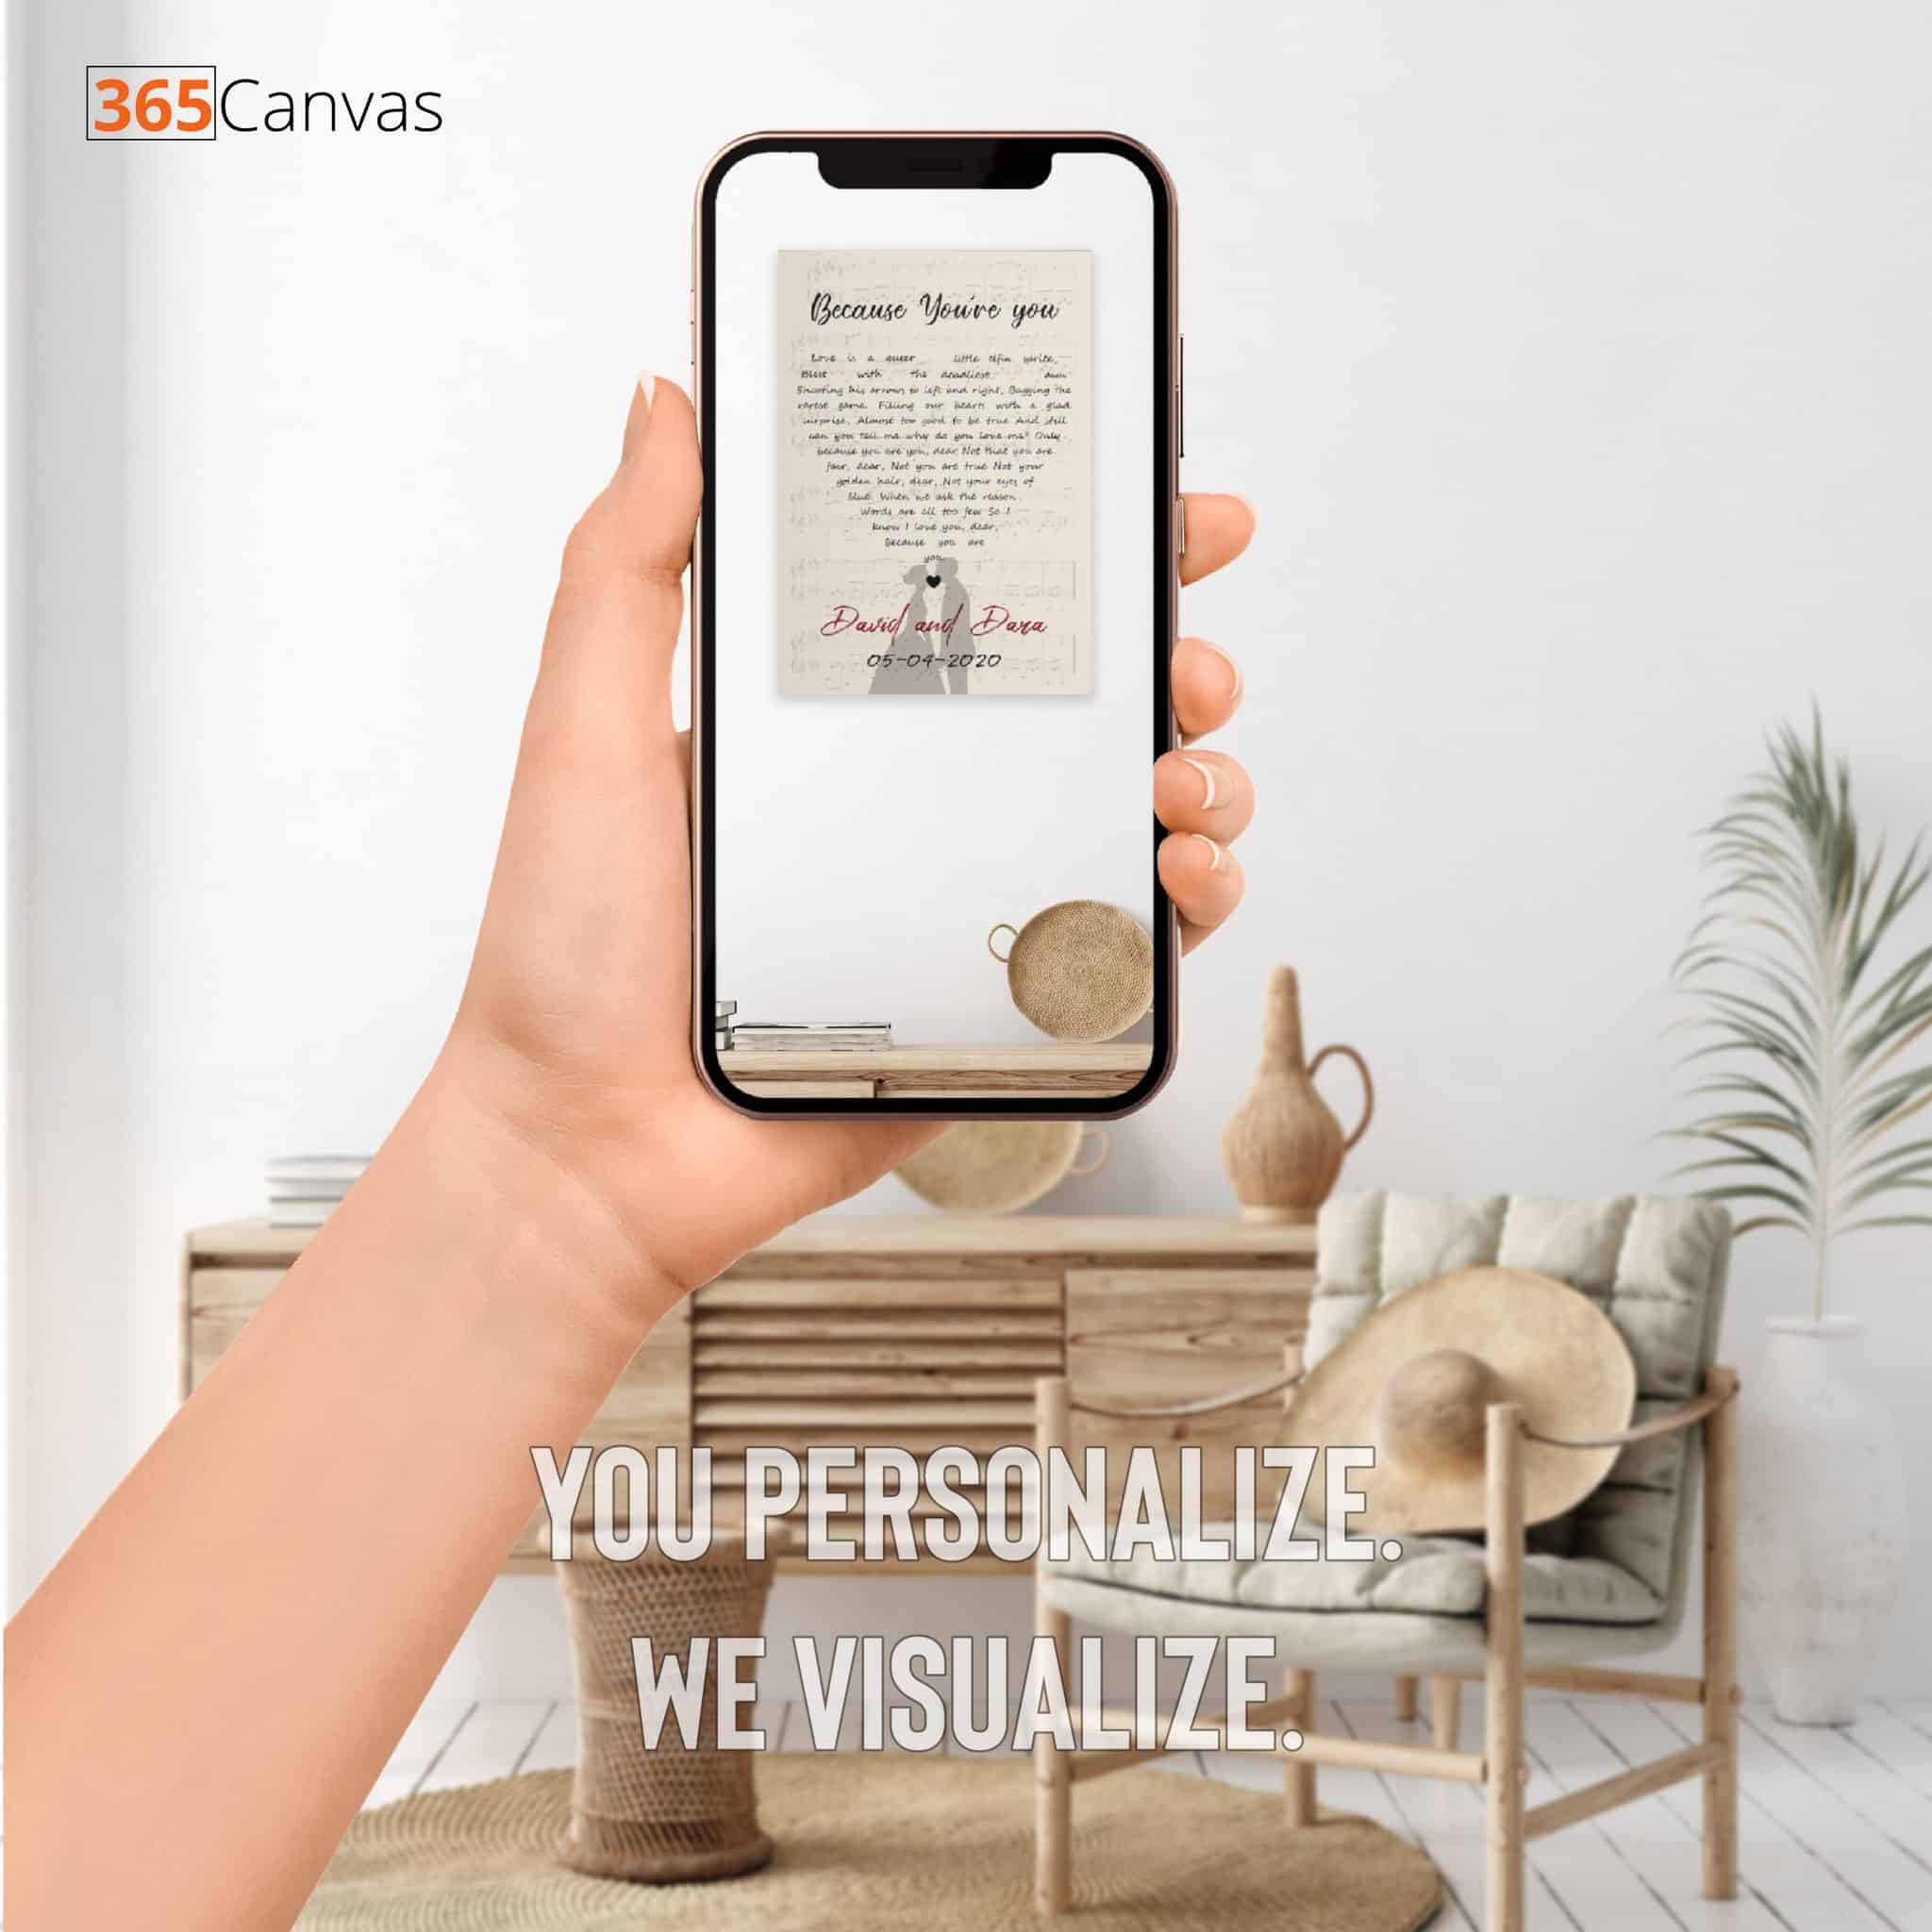 365Canvas’s Augmented Reality (AR) Tool Now Provides Life-like Shopping Experience